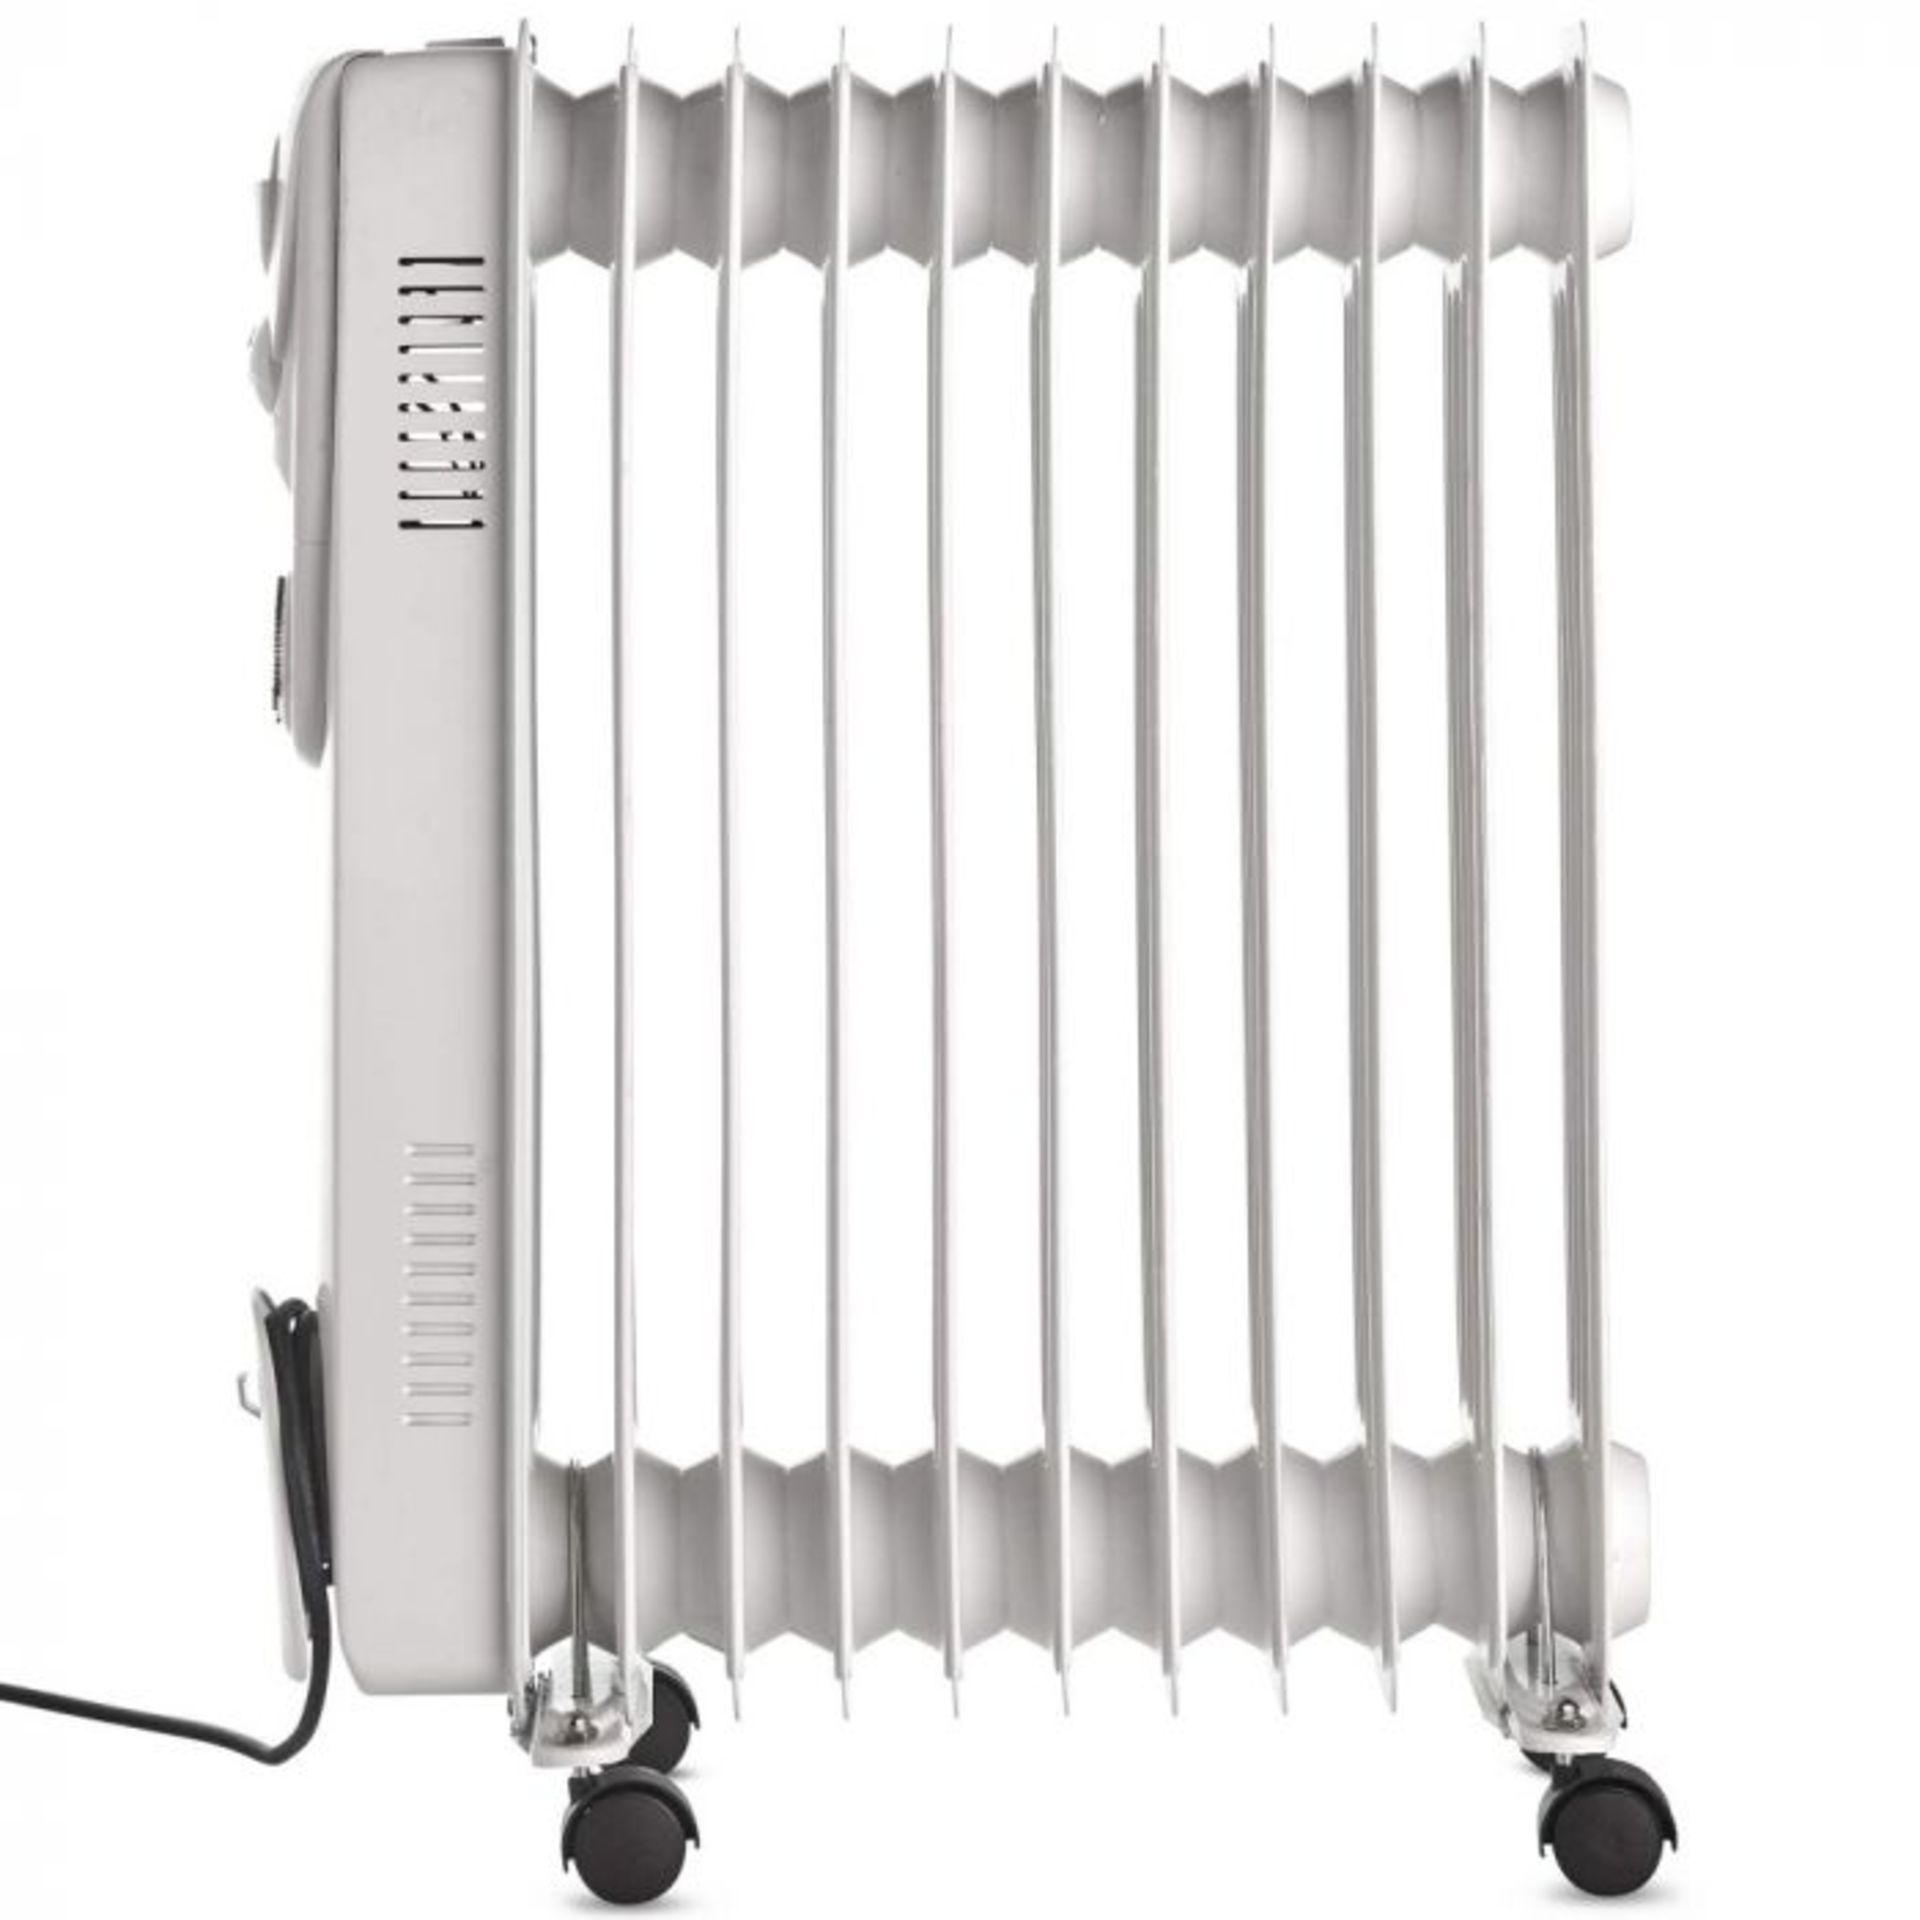 (T340) 11 Fin 2500W Oil Filled Radiator - White Suitable for areas up to 28 square metres 3 p... - Image 4 of 4